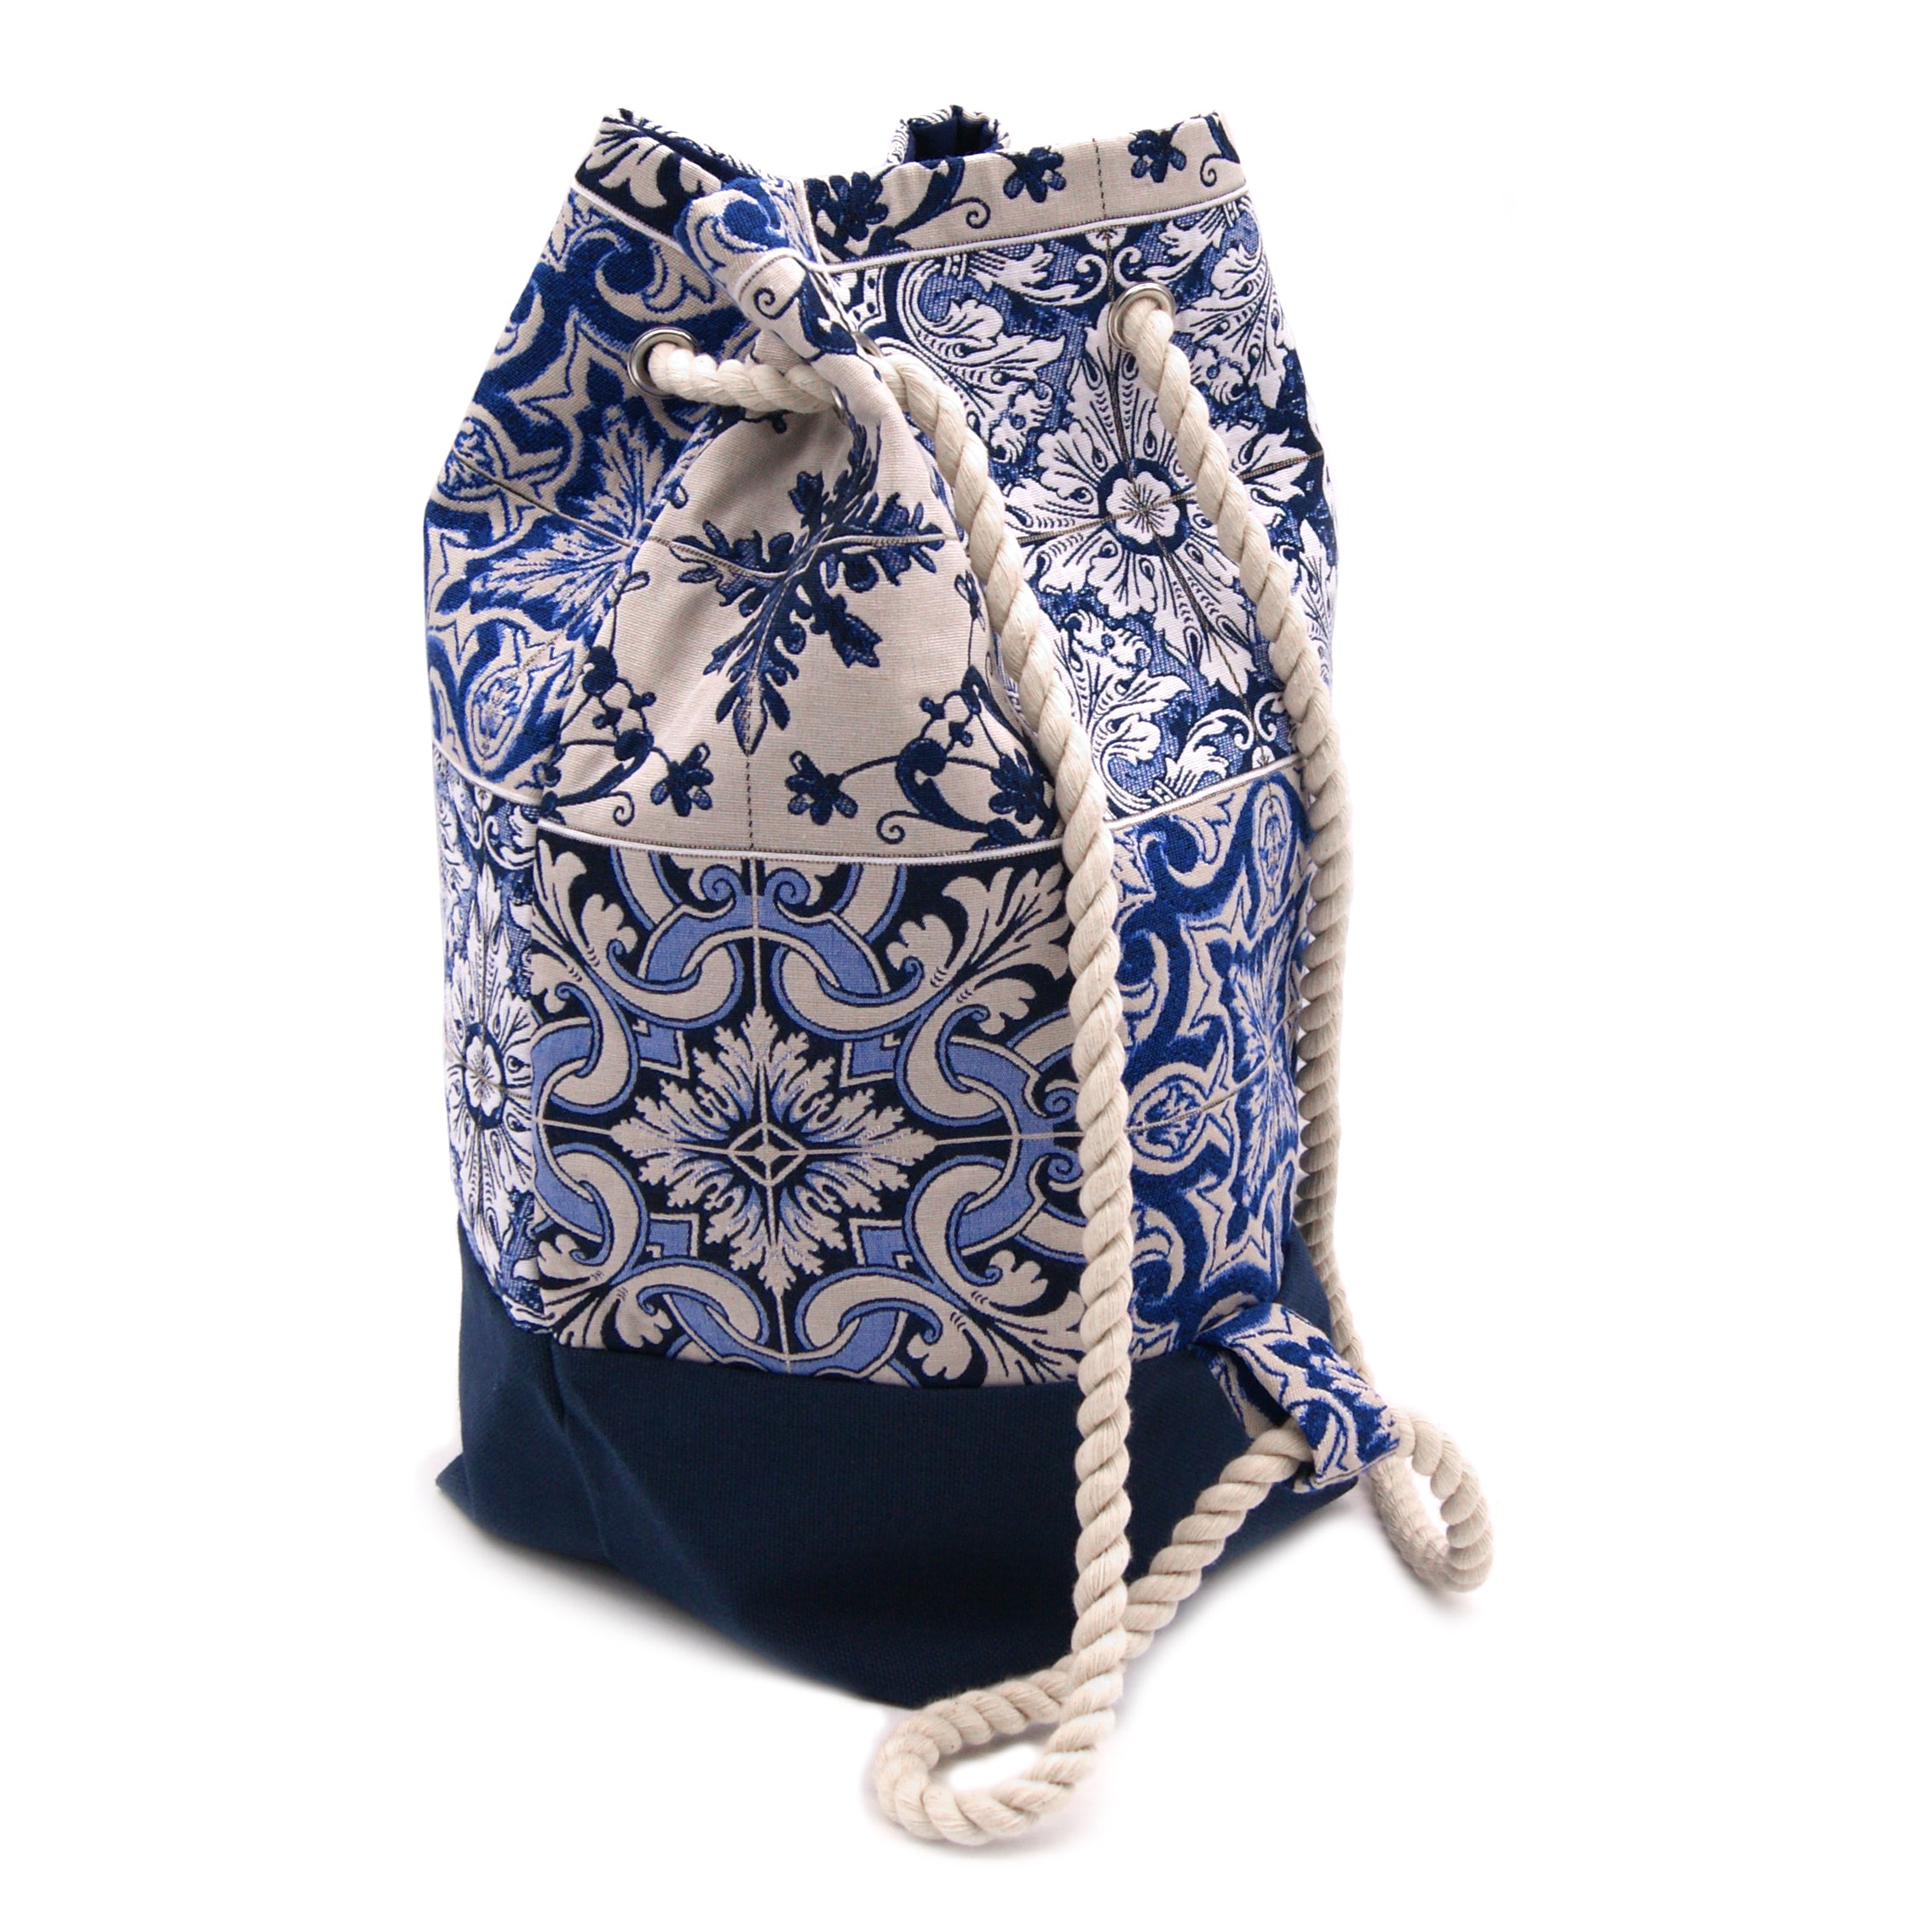 Eco-Friendly Handmade in Portugal Purse Convento Women Backpack